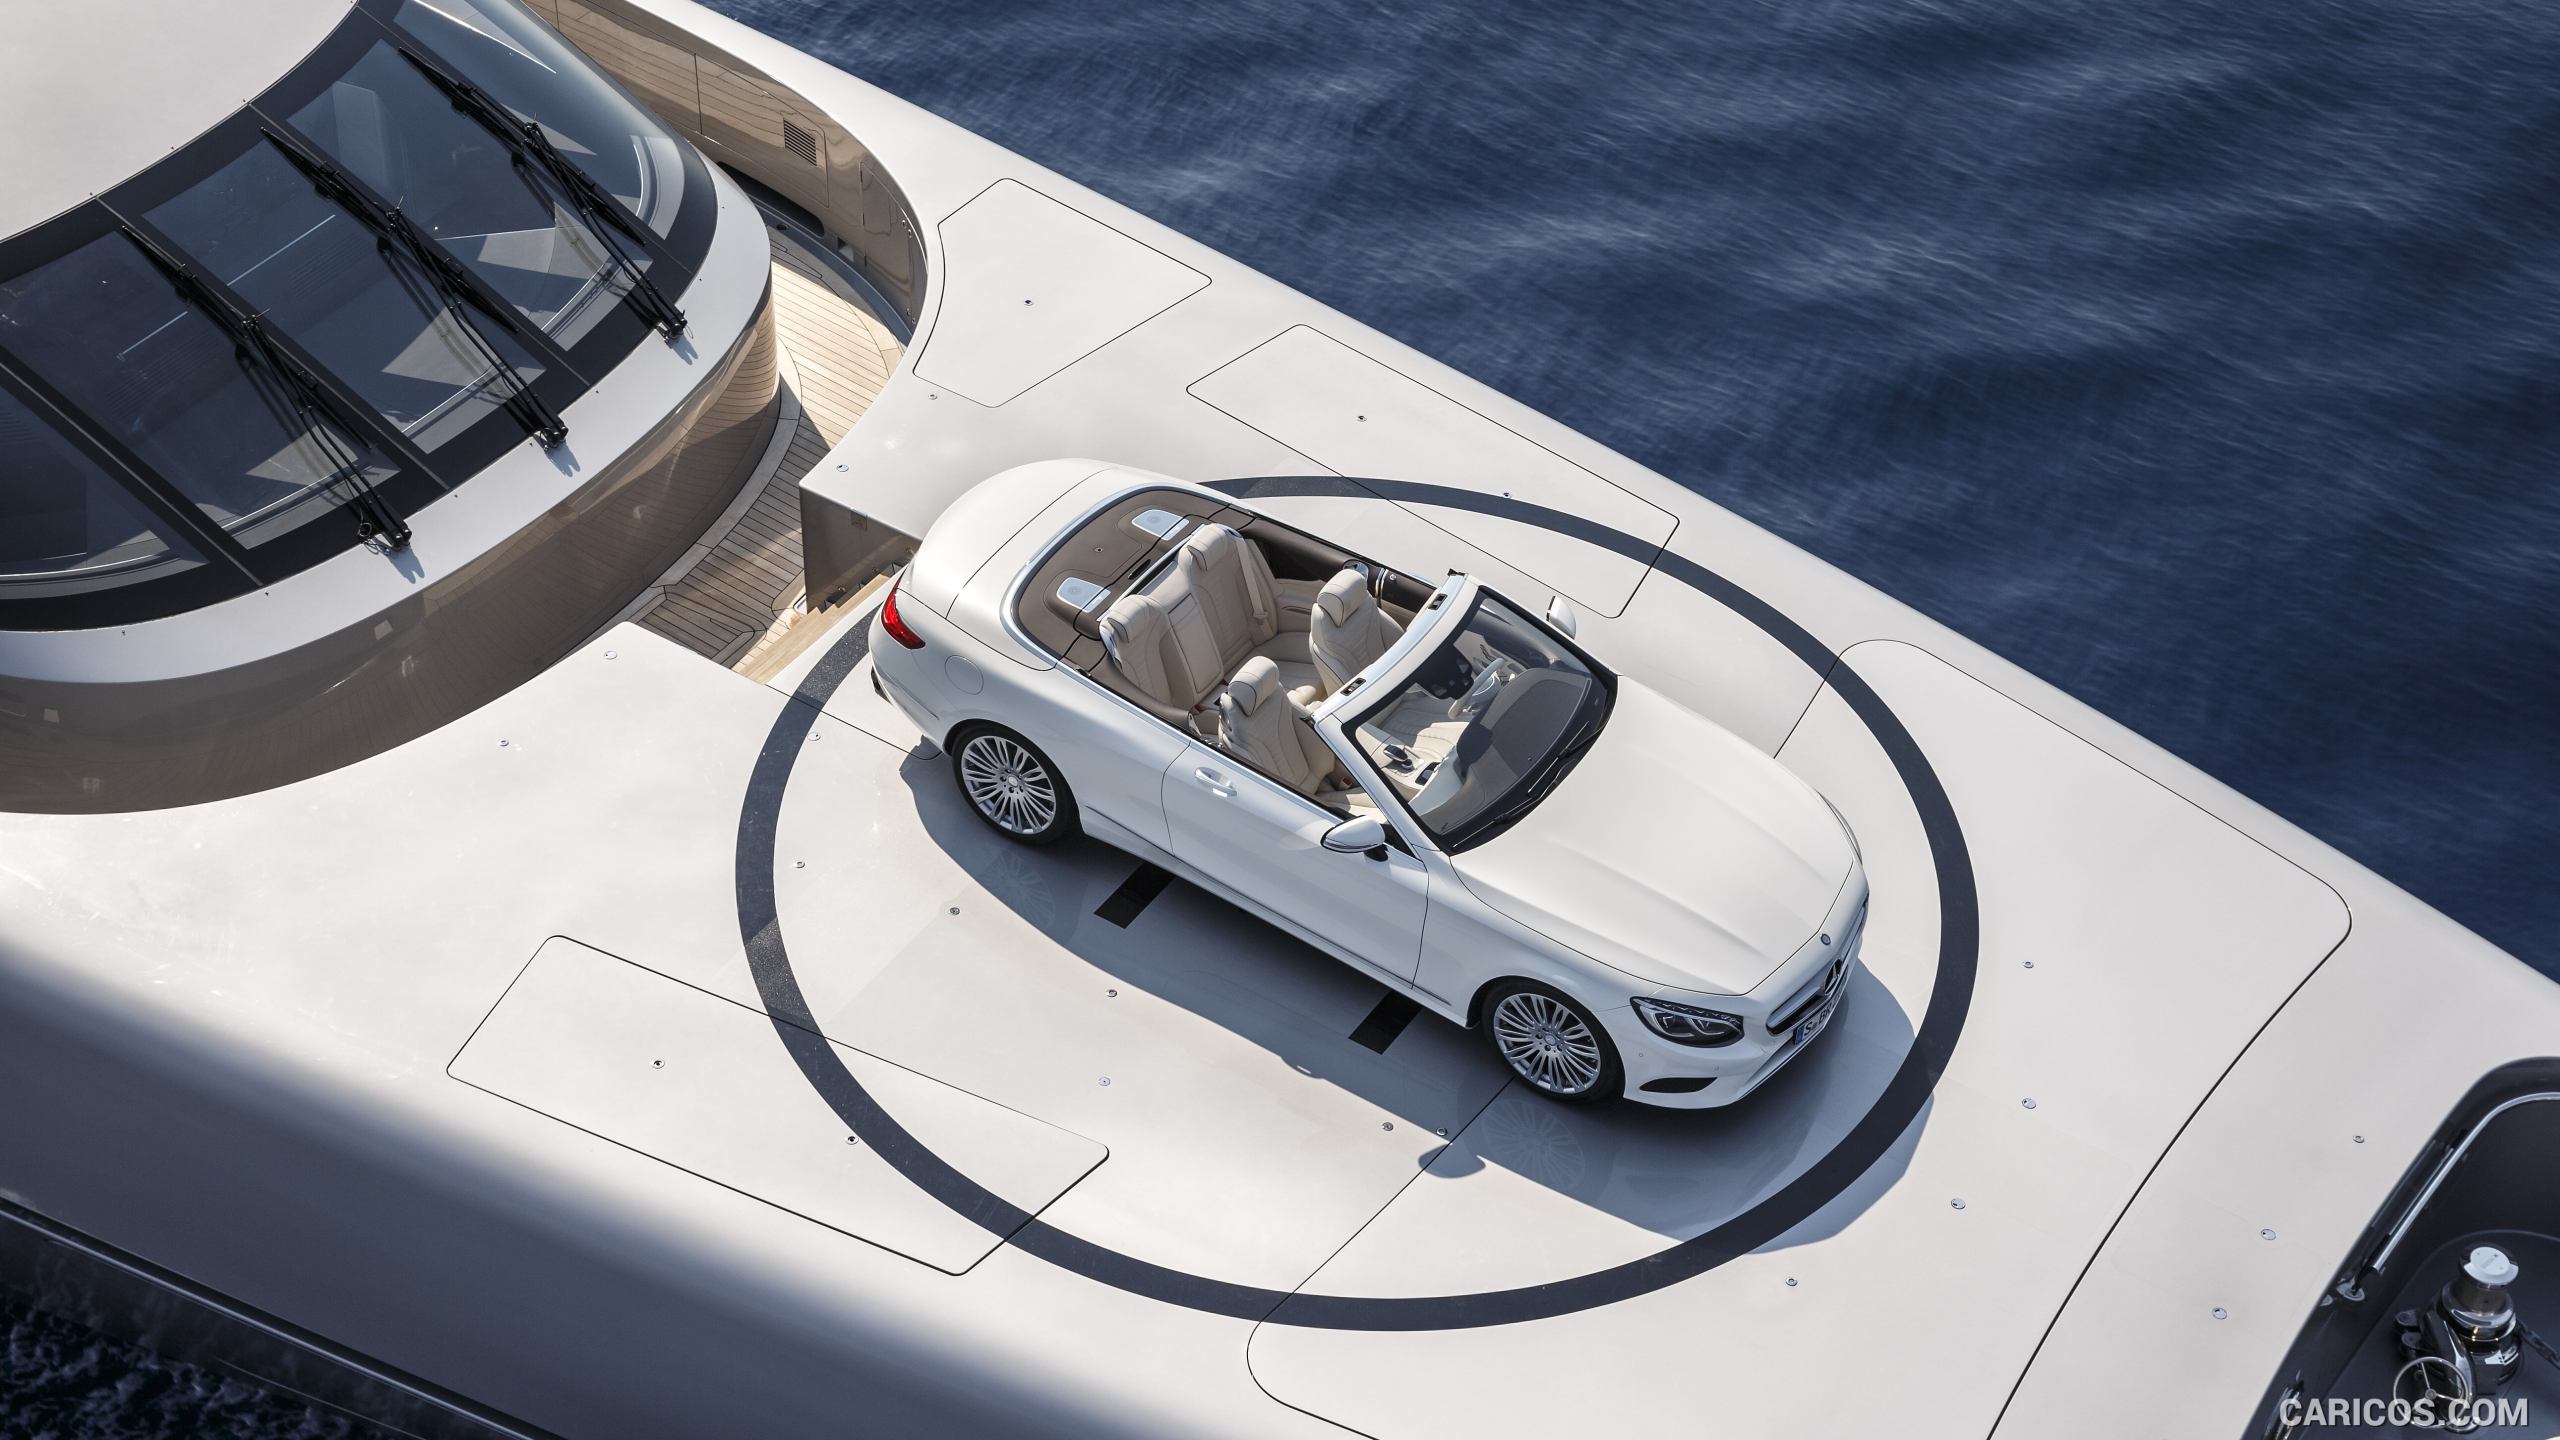 2017 Mercedes-Benz S-Class S500 Cabriolet aboard Silver Fast Yacht - Top, #50 of 56